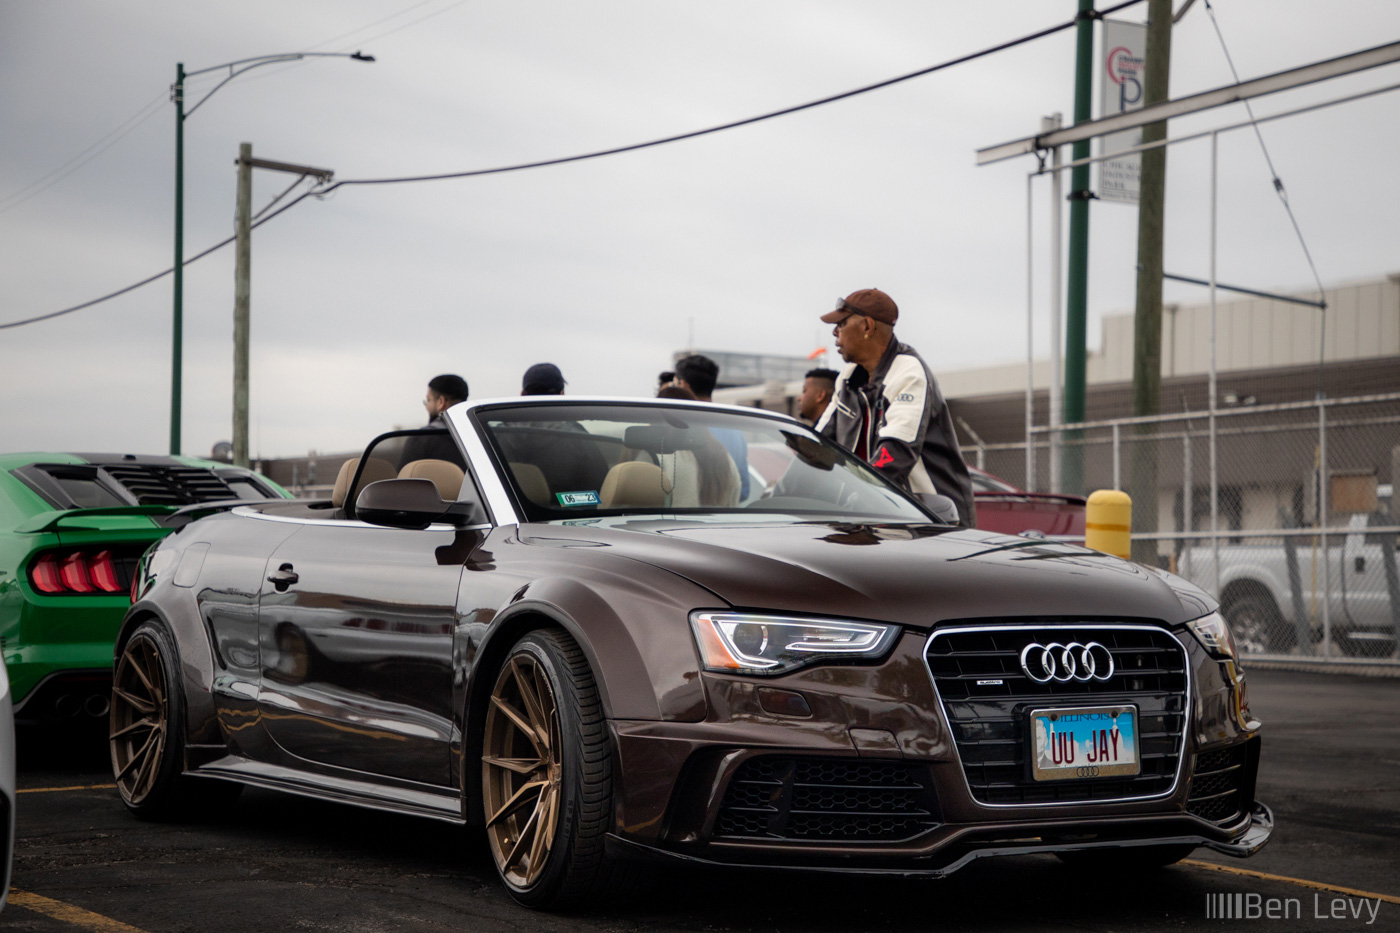 Brown Audi S4 at a Chicago Cars & Coffee